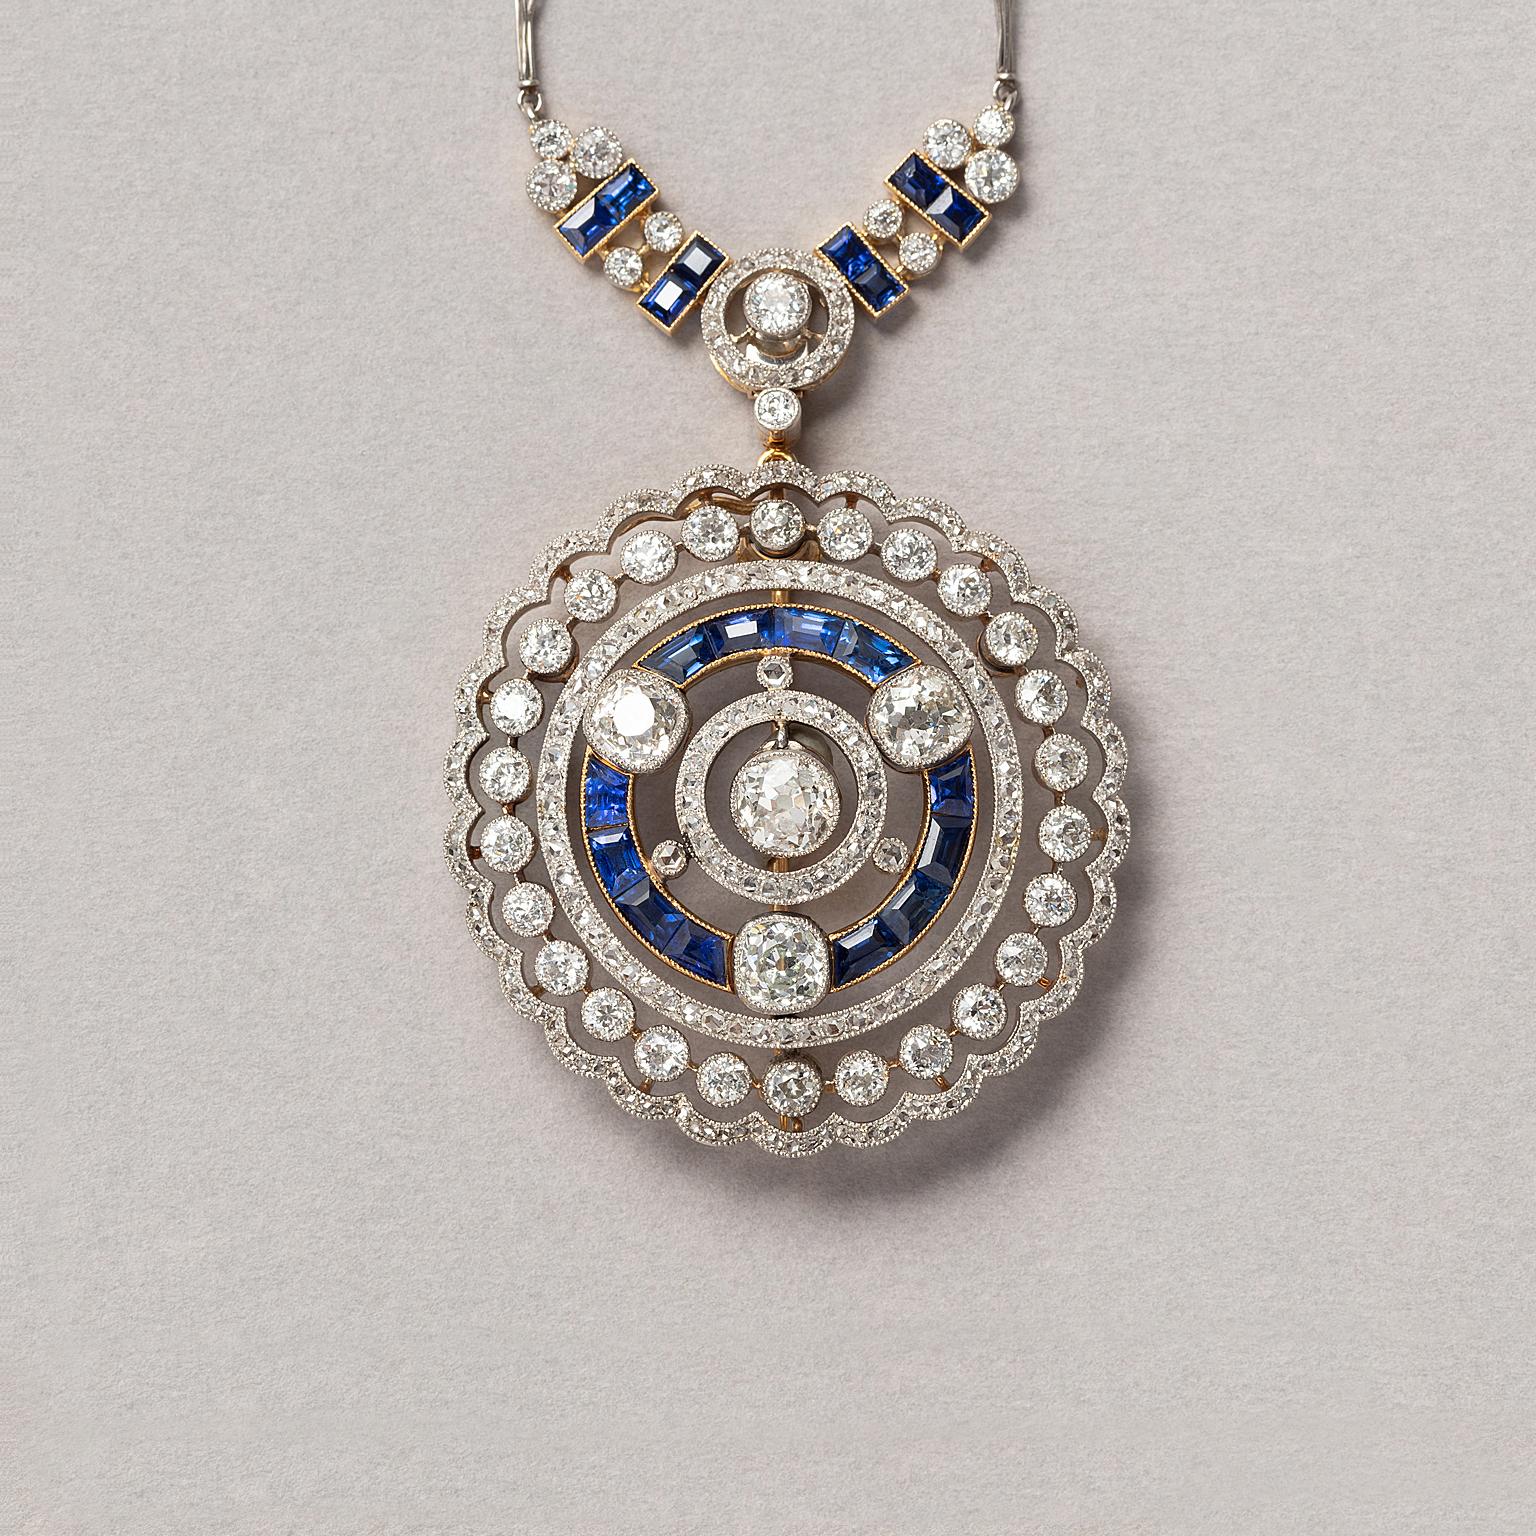 A Diamond and Sapphire necklace or Pendant or Brooch 1